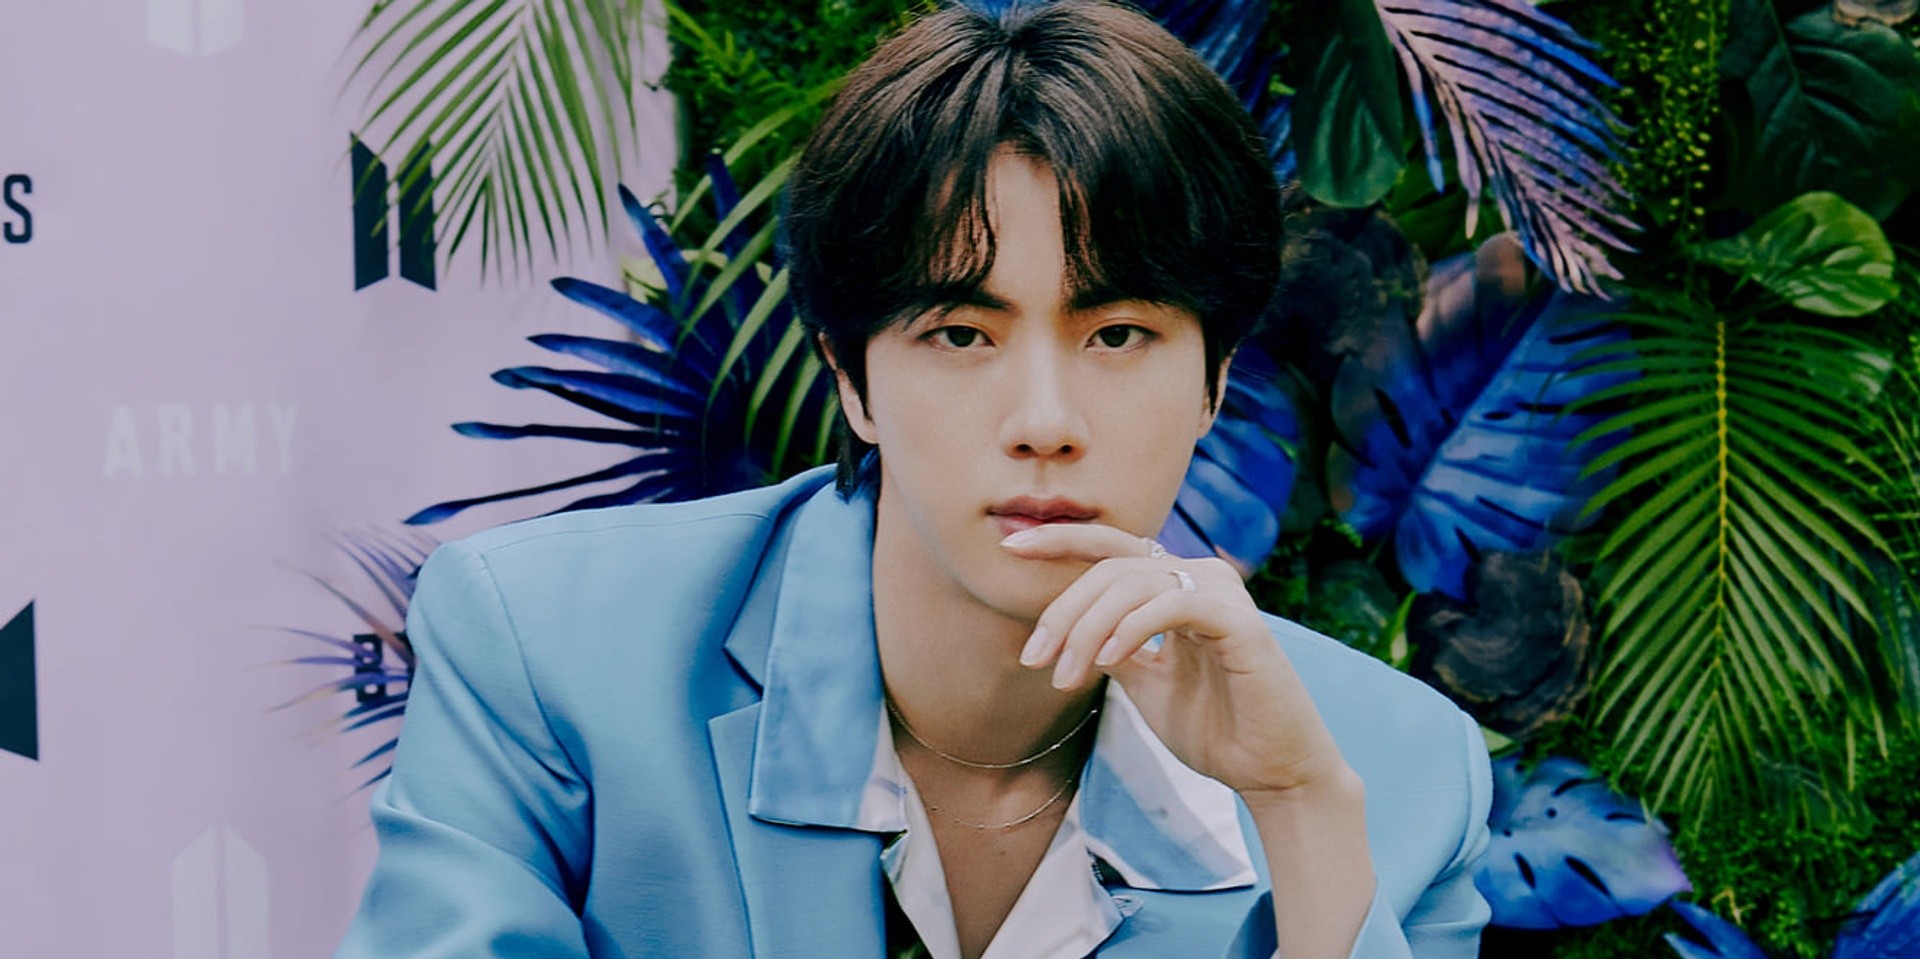 "Get well soon, Seokjinnie!" BTS fans send love and well-wishes for Jin as he recovers from surgery